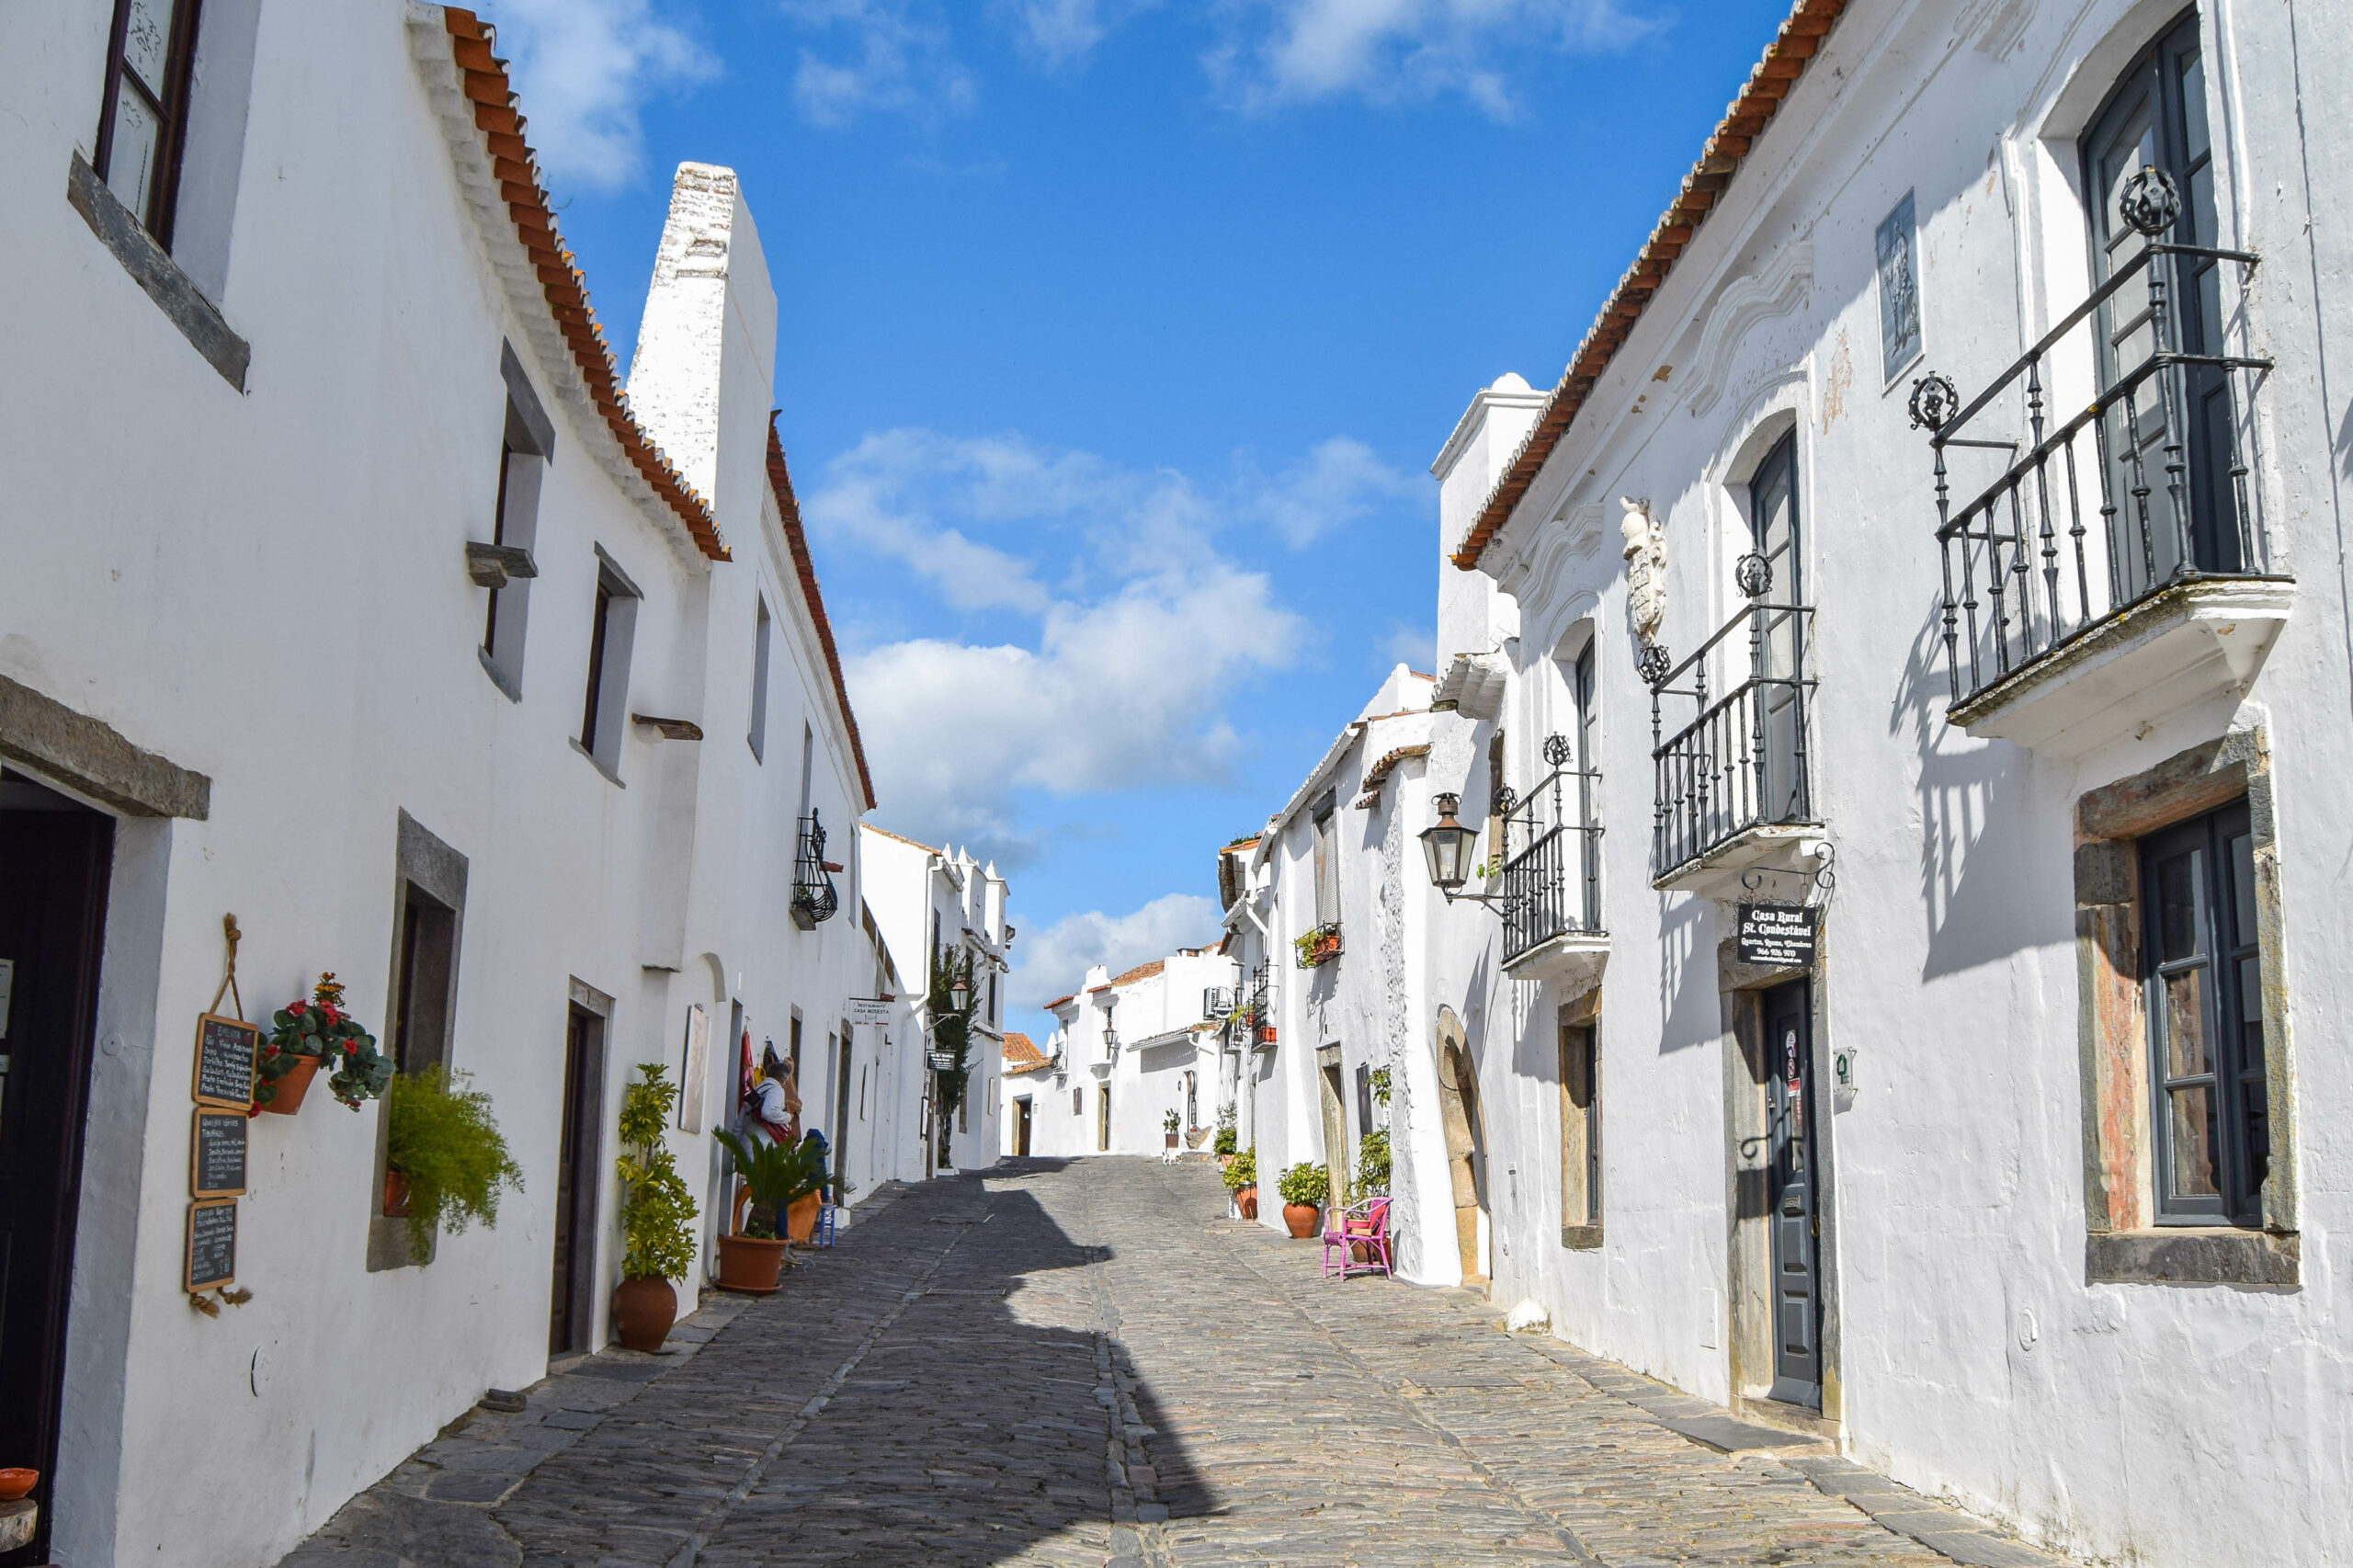 production-services-and-filming-in-portugal-street-in-medieval-town